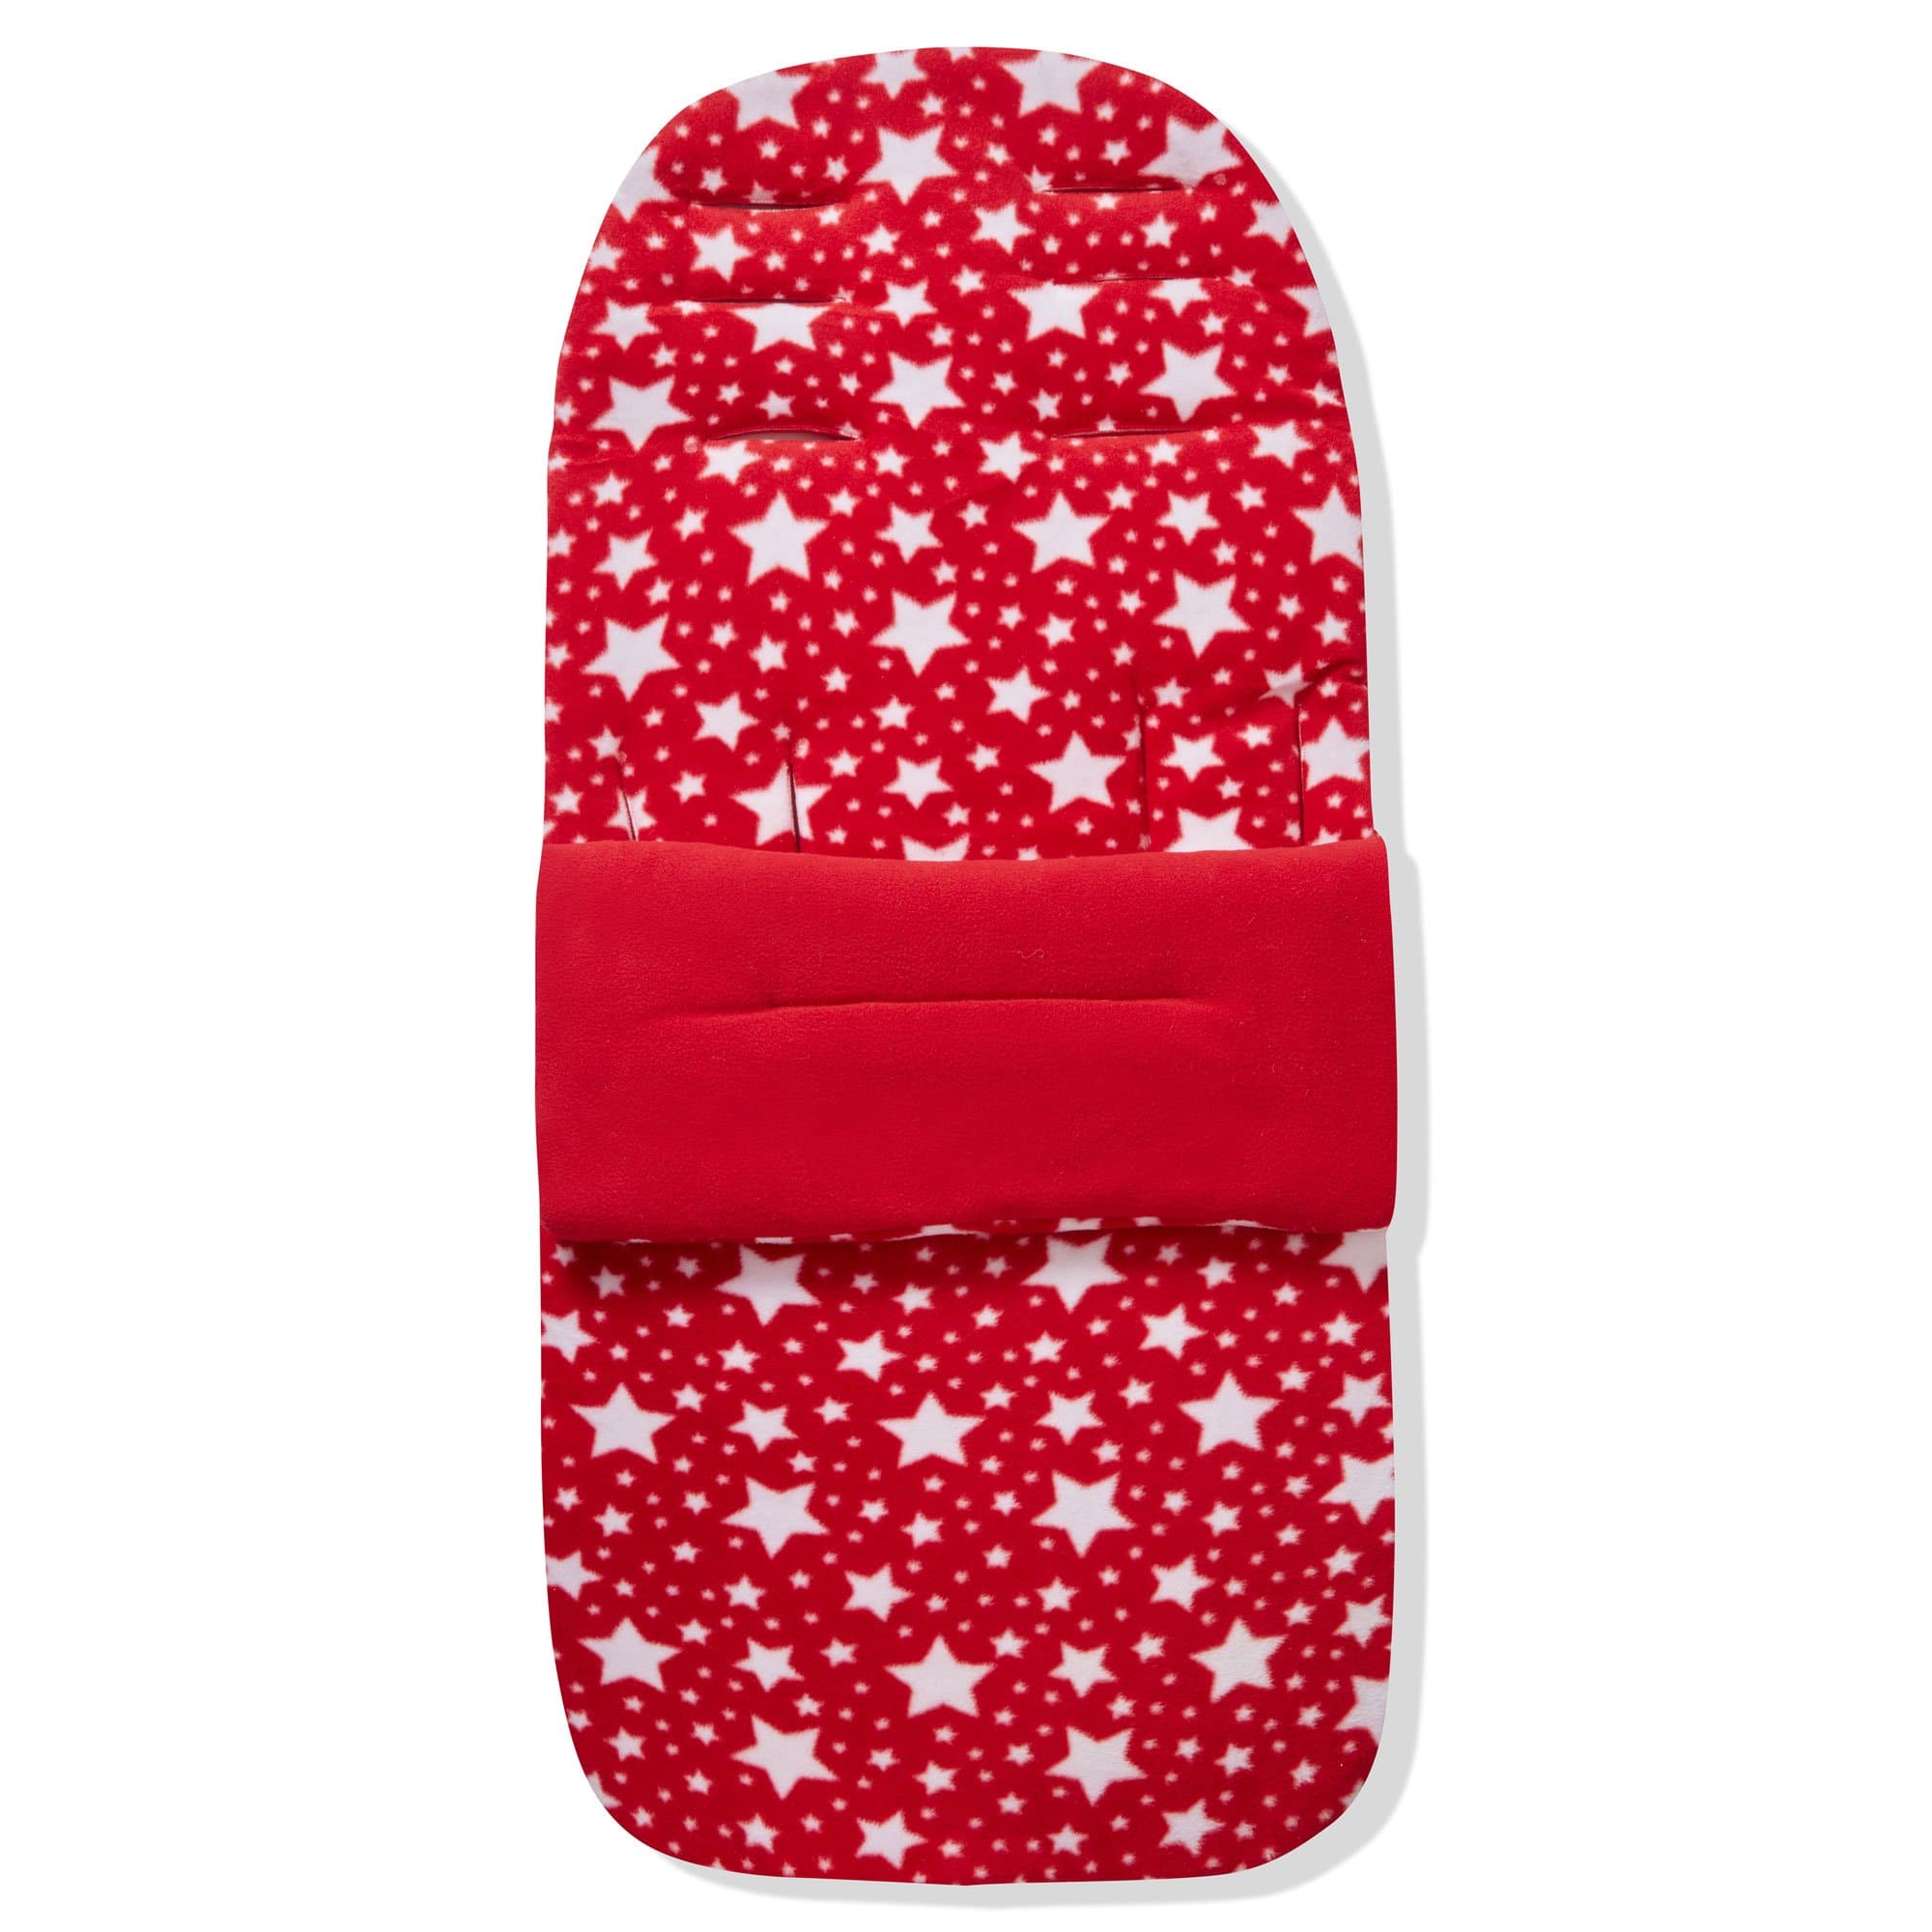 Fleece Footmuff / Cosy Toes Compatible with Bebecar - For Your Little One